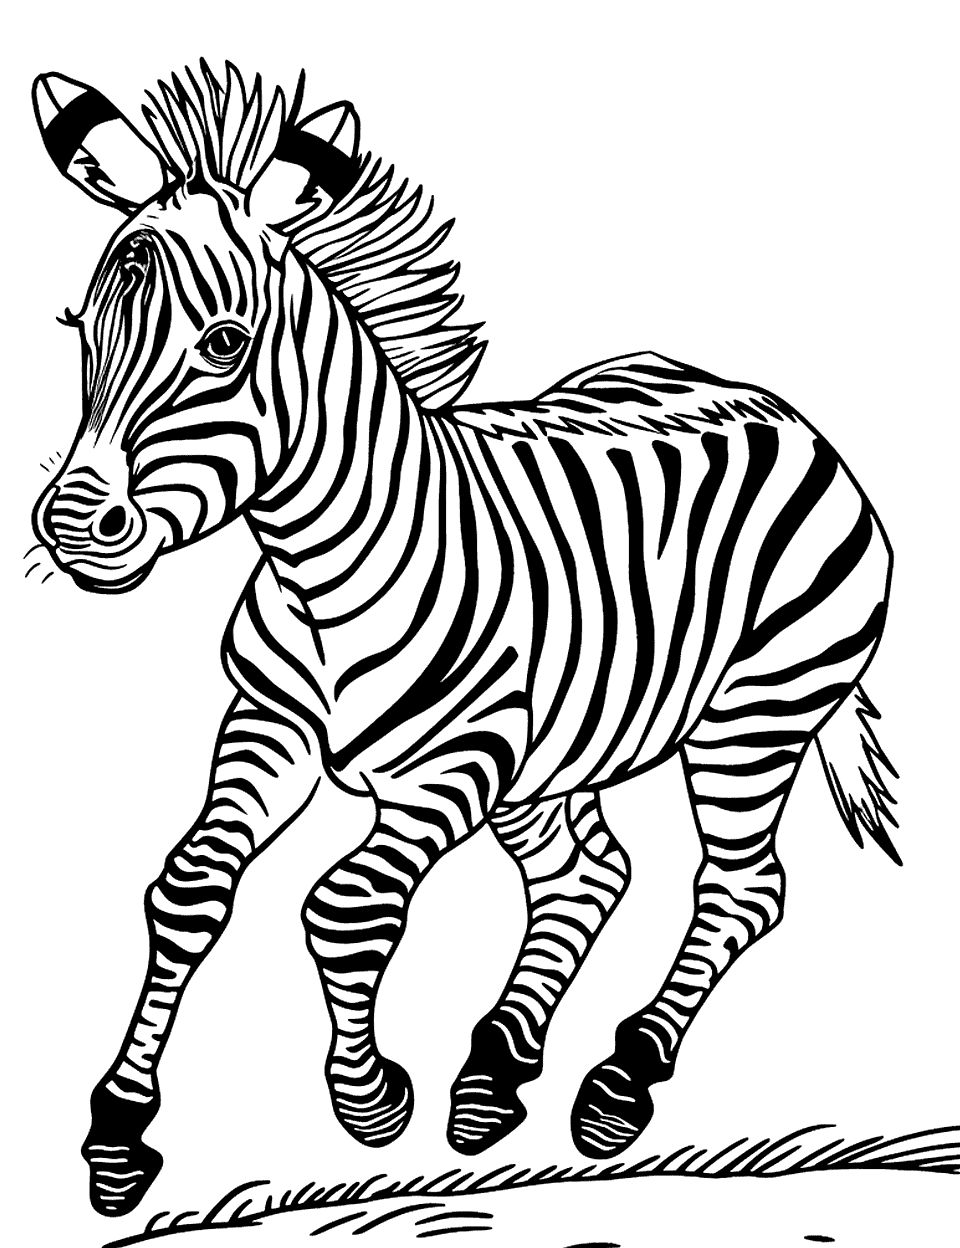 Young Zebra Running Coloring Page - A young zebra galloping joyfully across a plain.